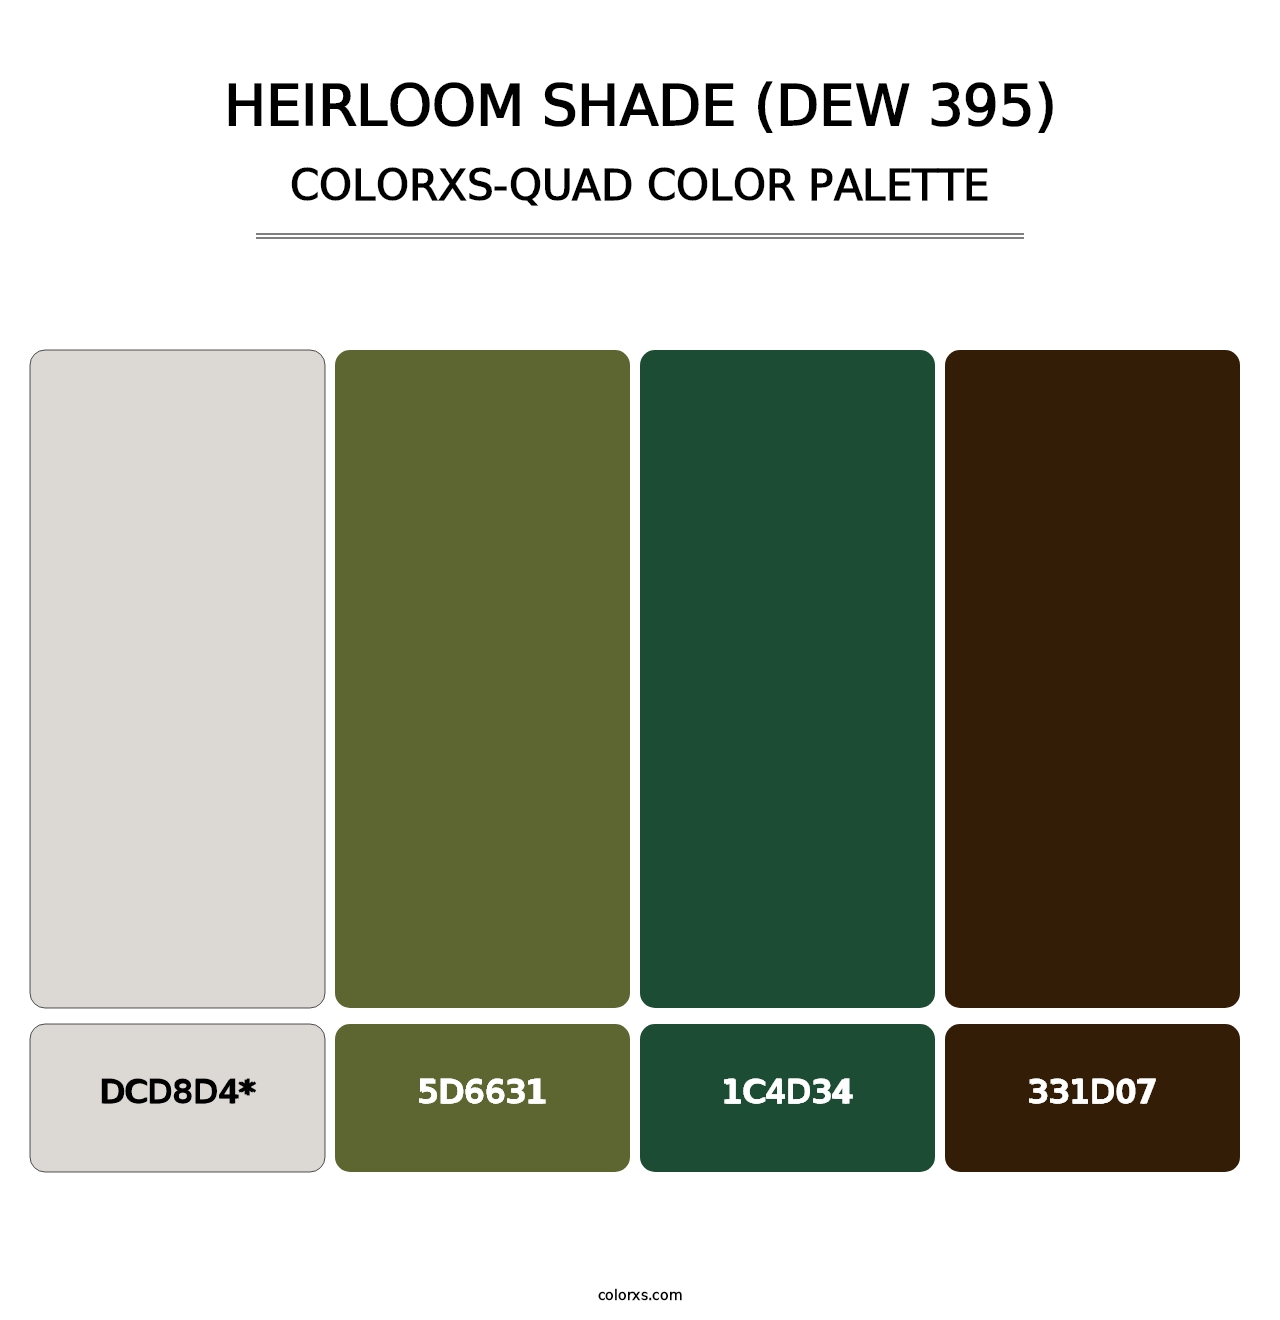 Heirloom Shade (DEW 395) - Colorxs Quad Palette